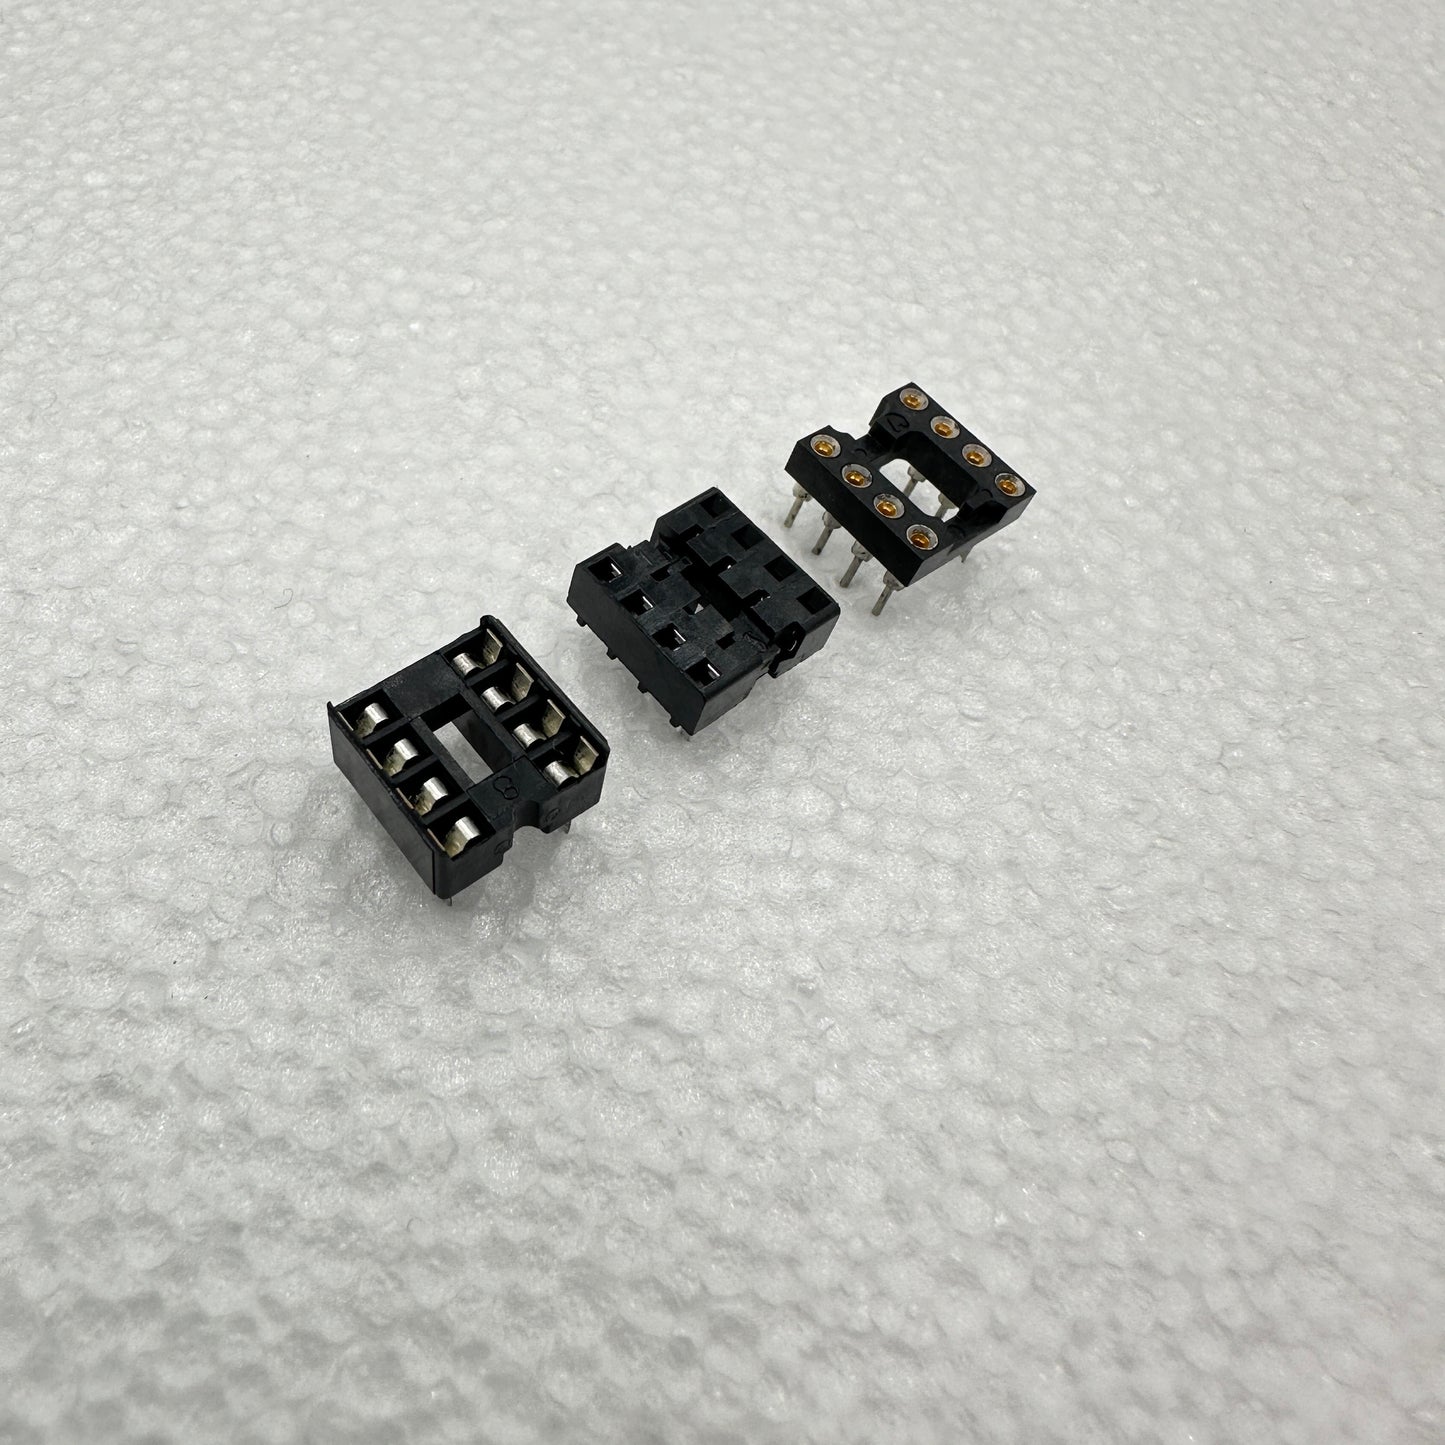 DIP8 8 Pin Op-Amp IC Socket (with Options)